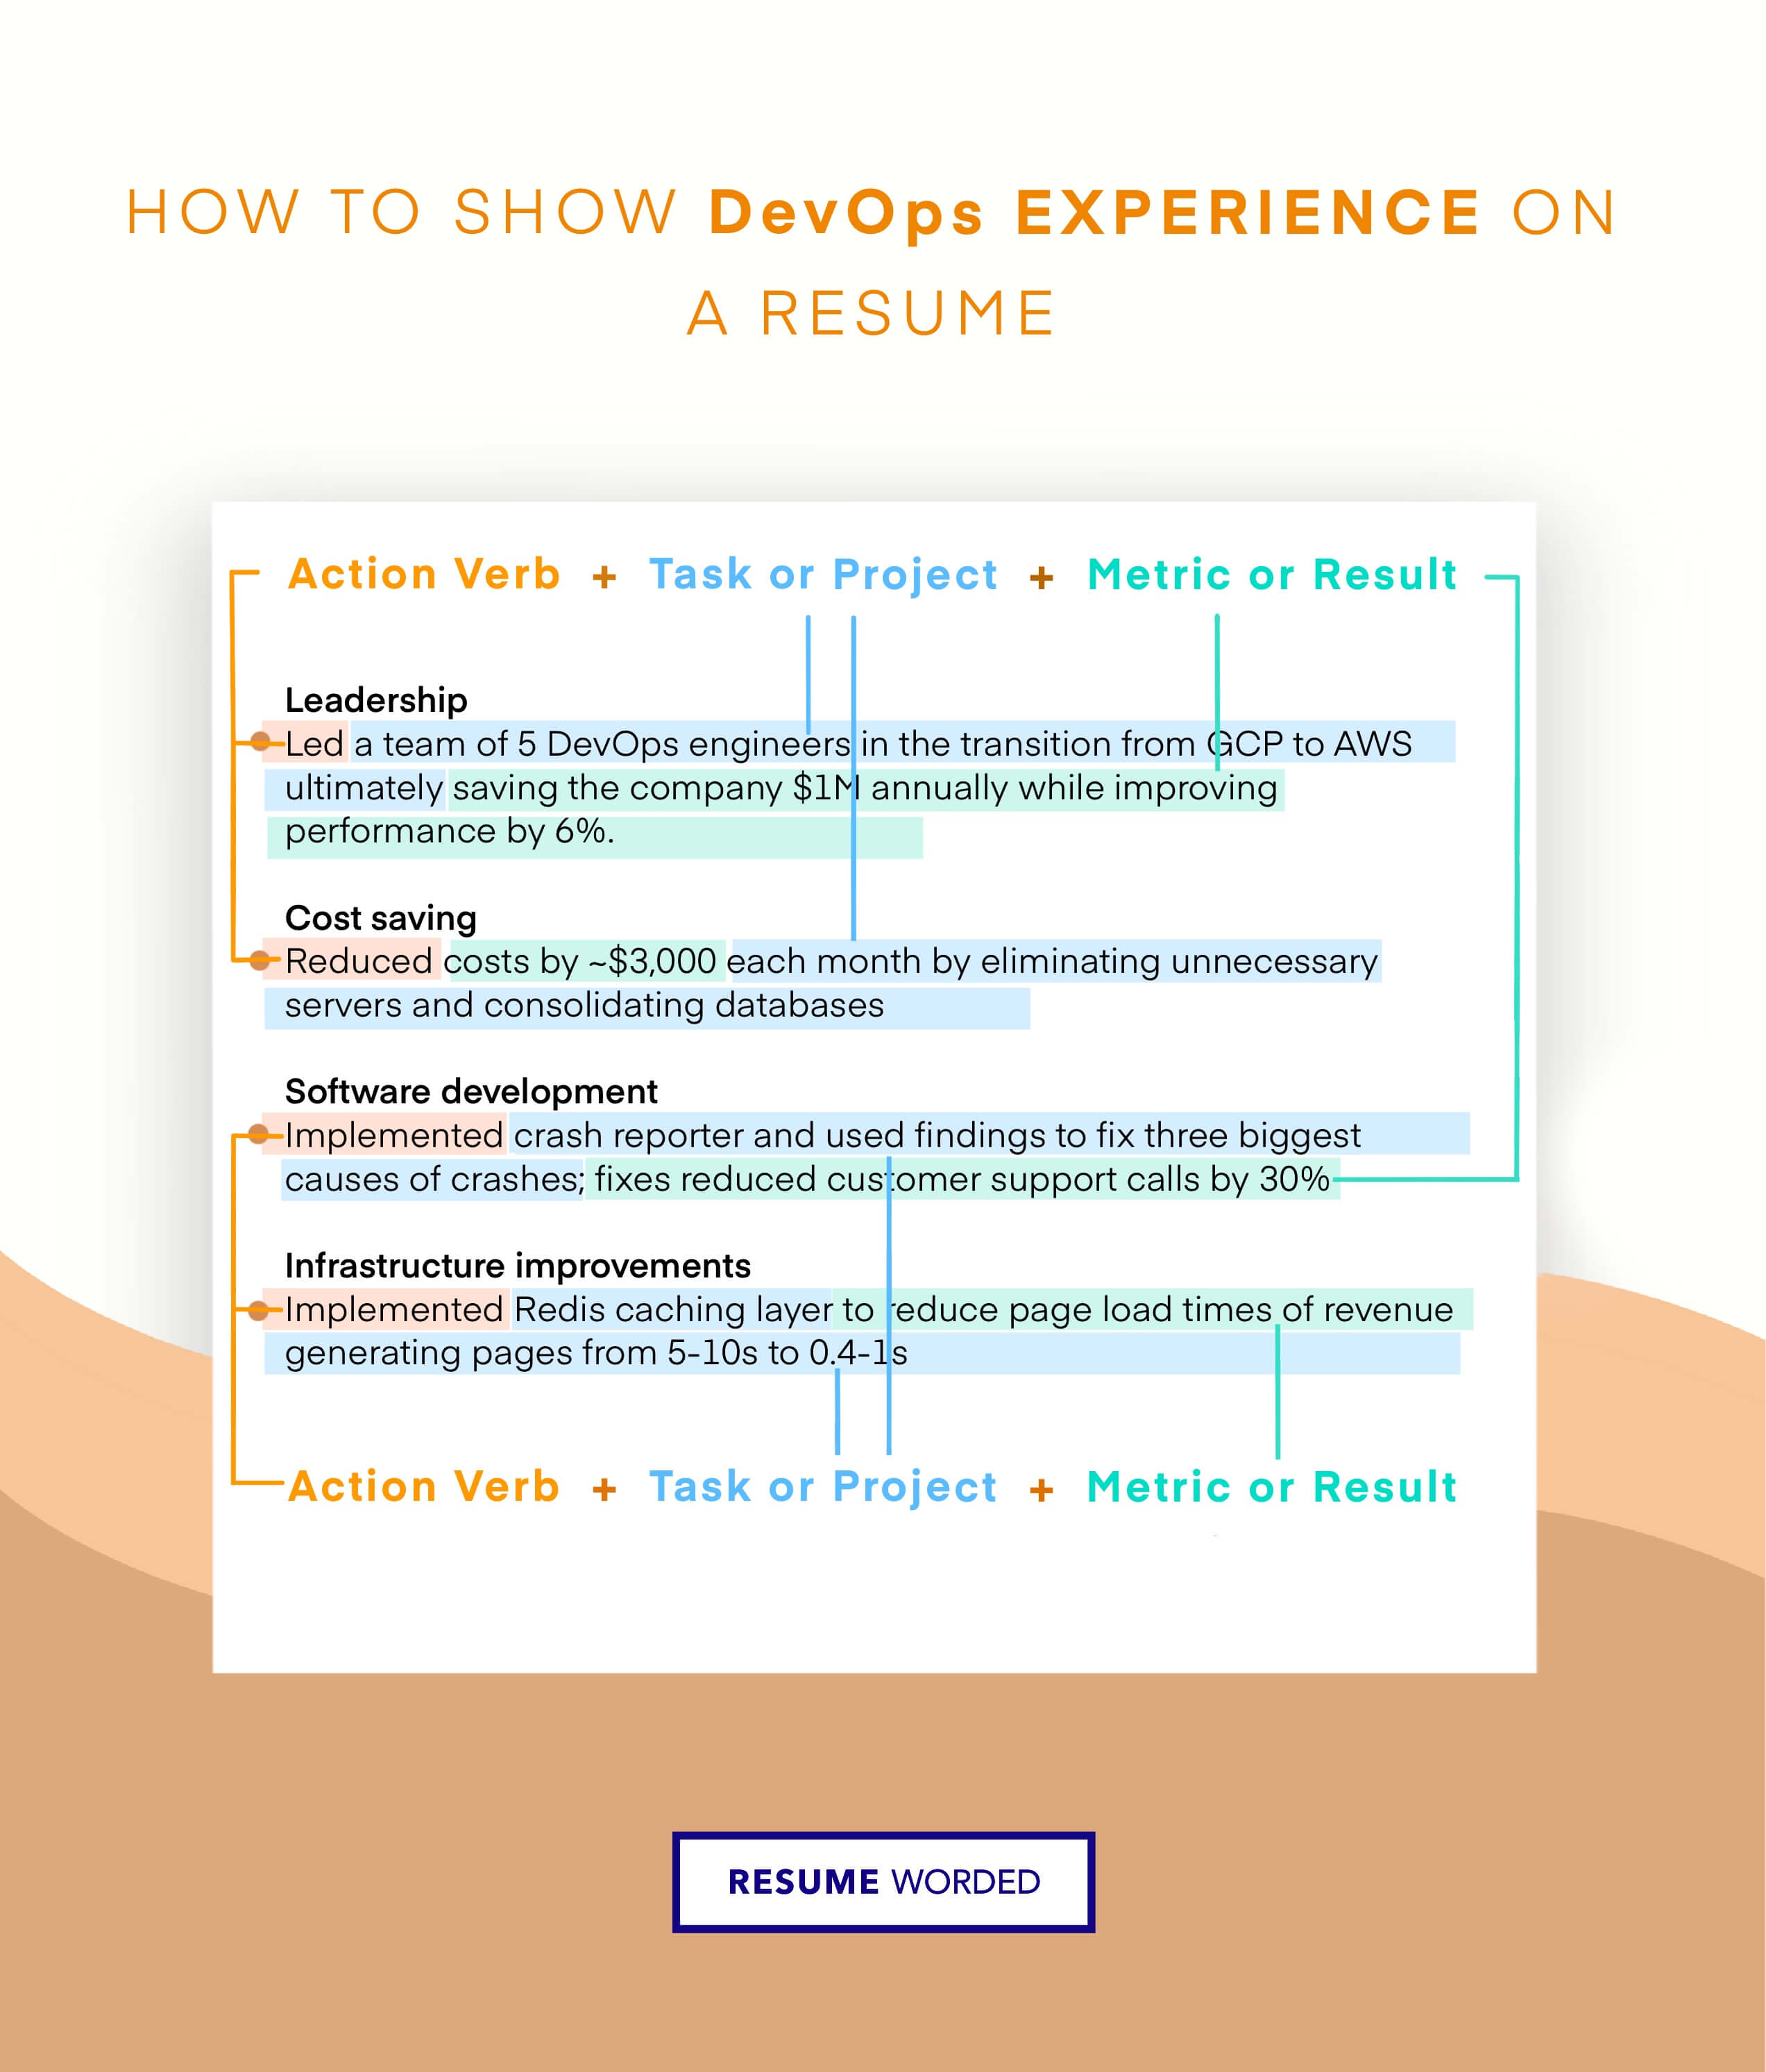 Showcase your experience with leveraging DevOps practices - Java Full Stack Developer CV